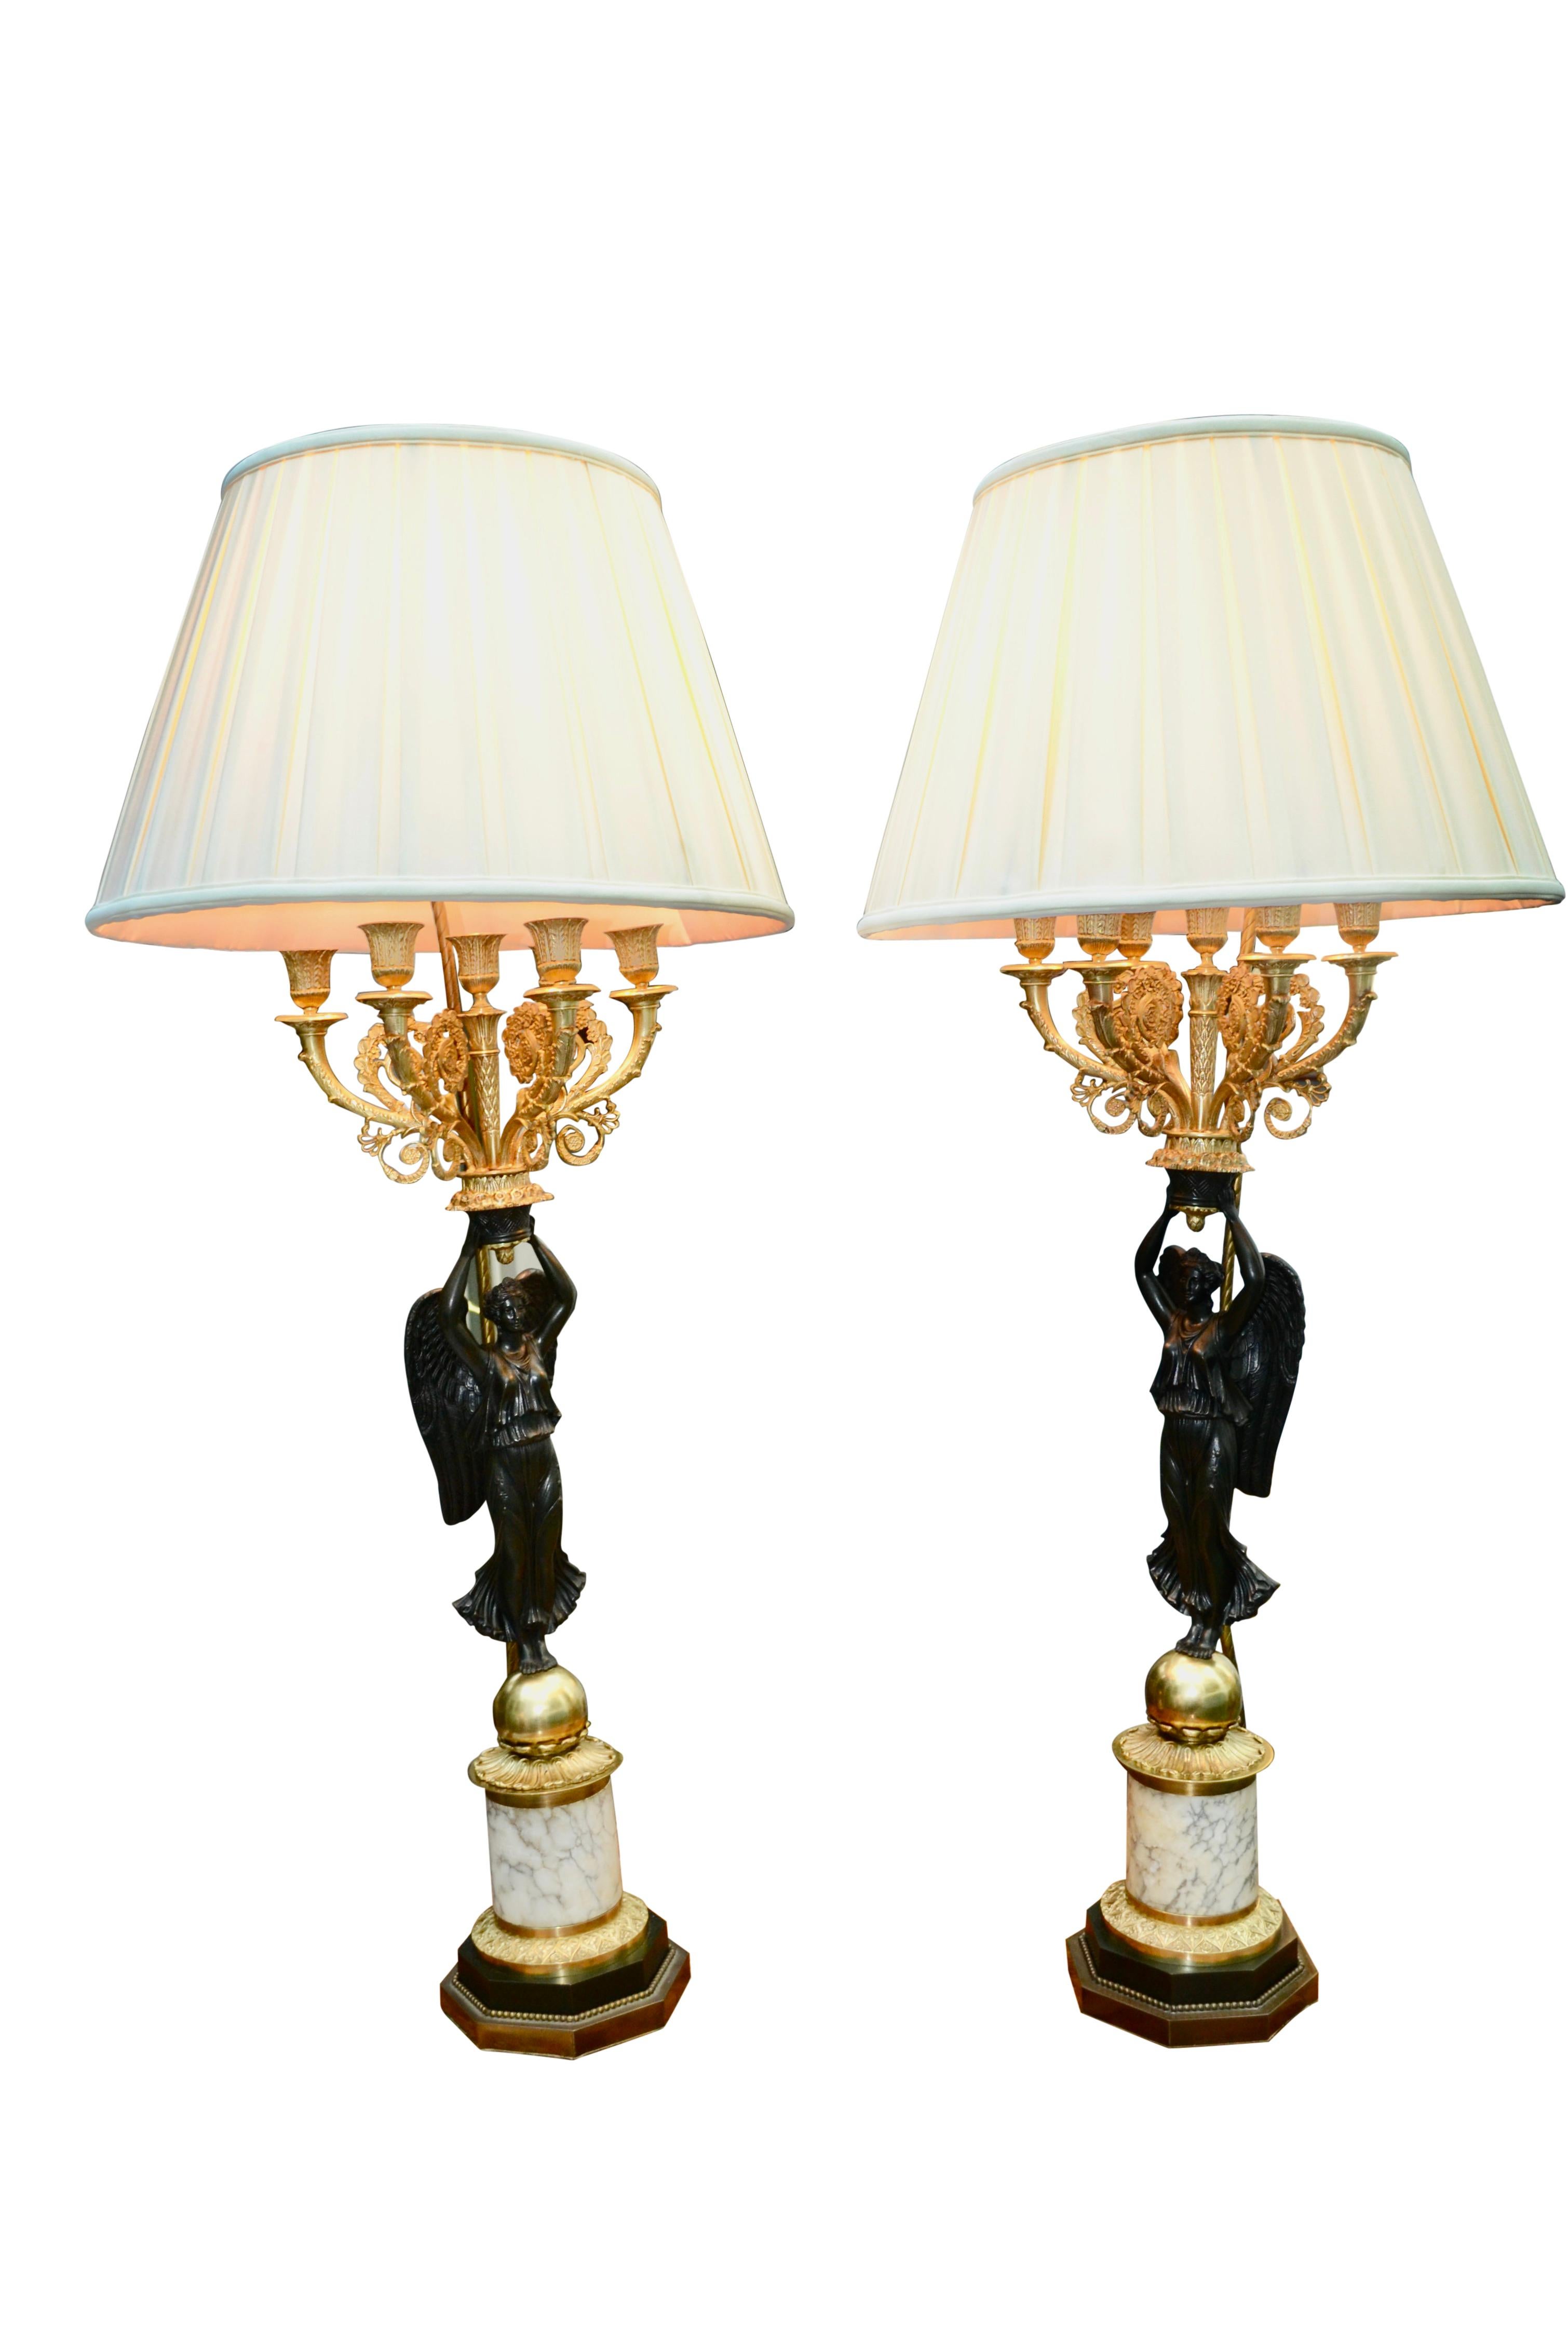 A Pair of French Empire Style Patinated and Gilt Bronze Winged Victory Lamps In Good Condition For Sale In Vancouver, British Columbia